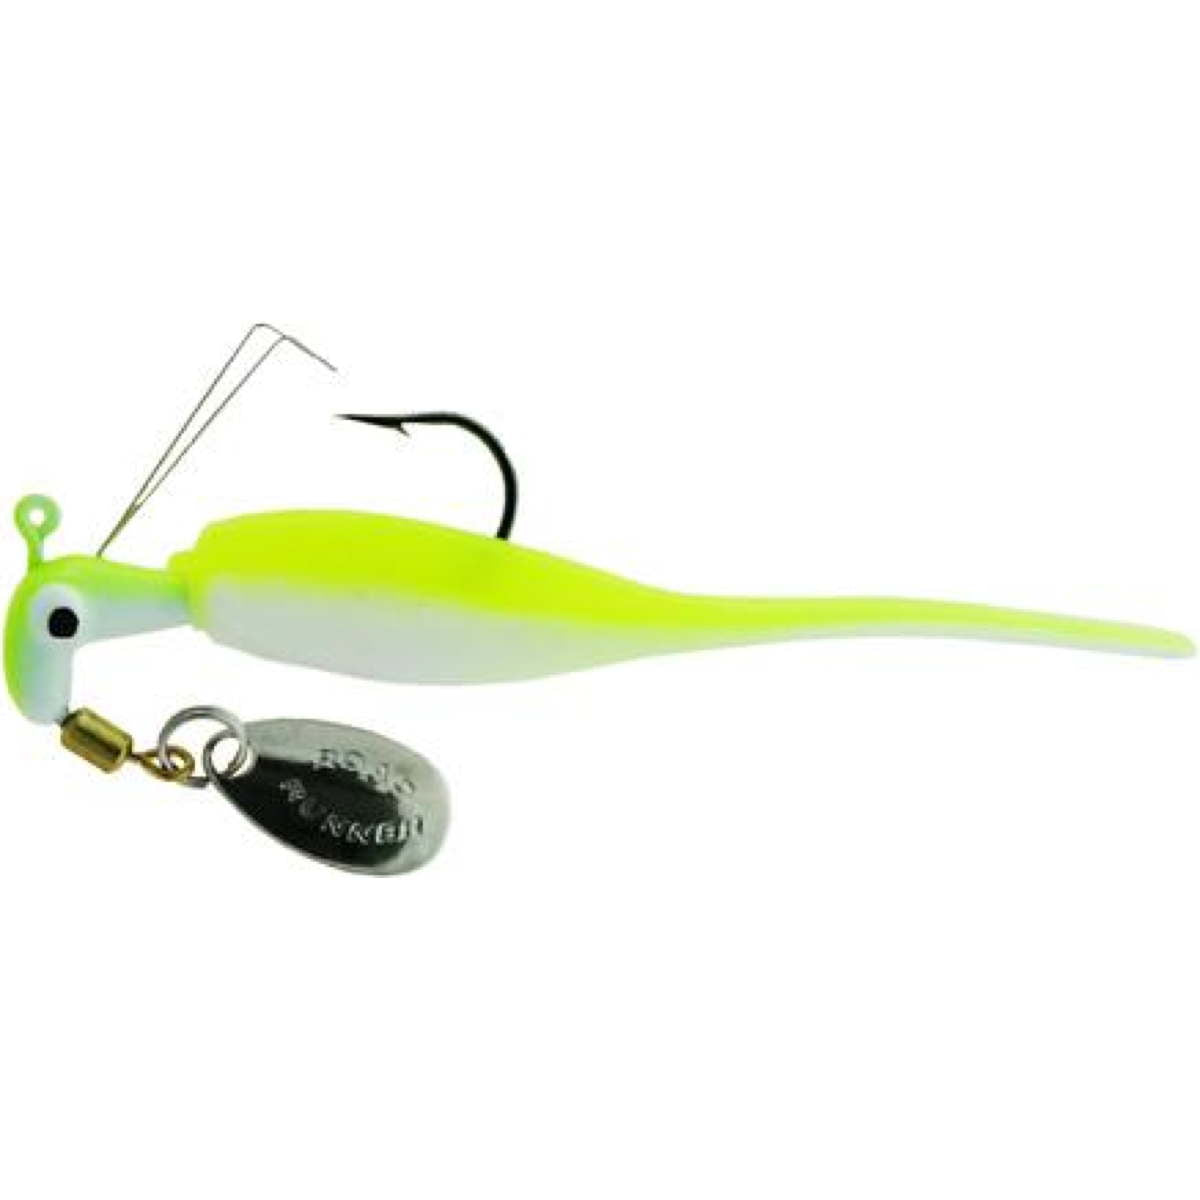 Photo of Blakemore Slab Runner Weedless for sale at United Tackle Shops.